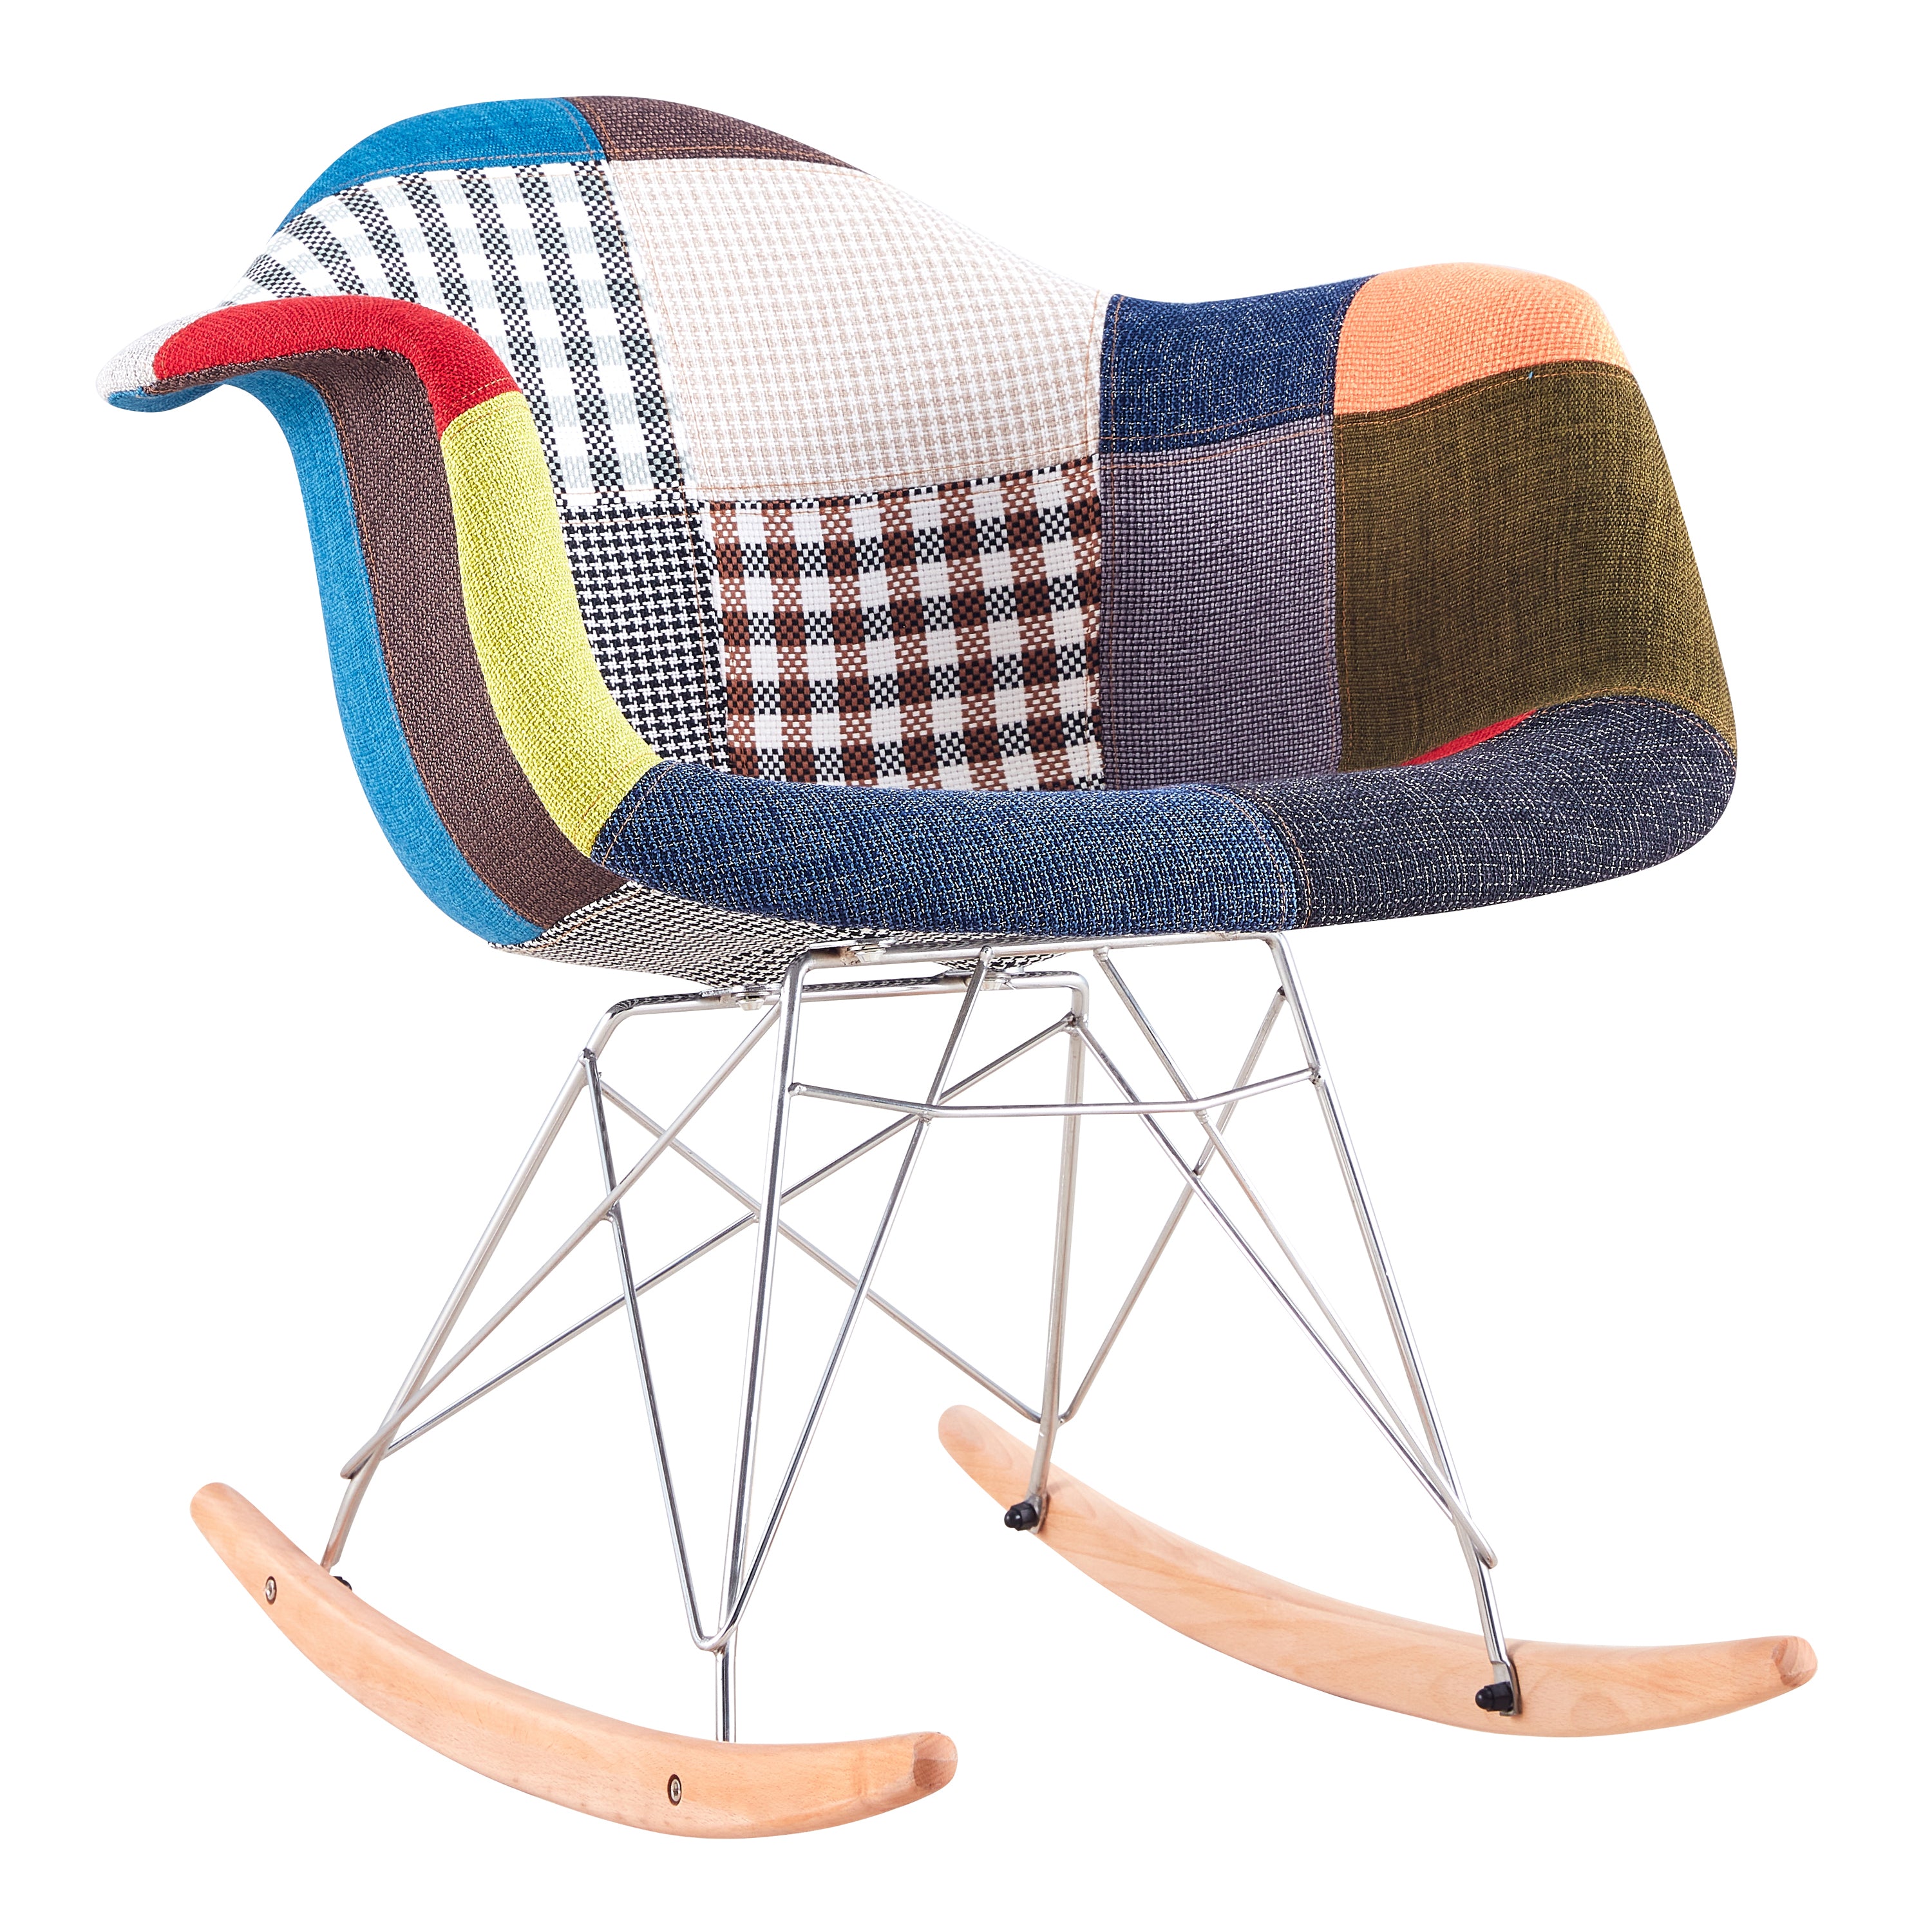 Rocking Armrest Patchwork Lounge Chair - Multicolor Chair urbancart.in